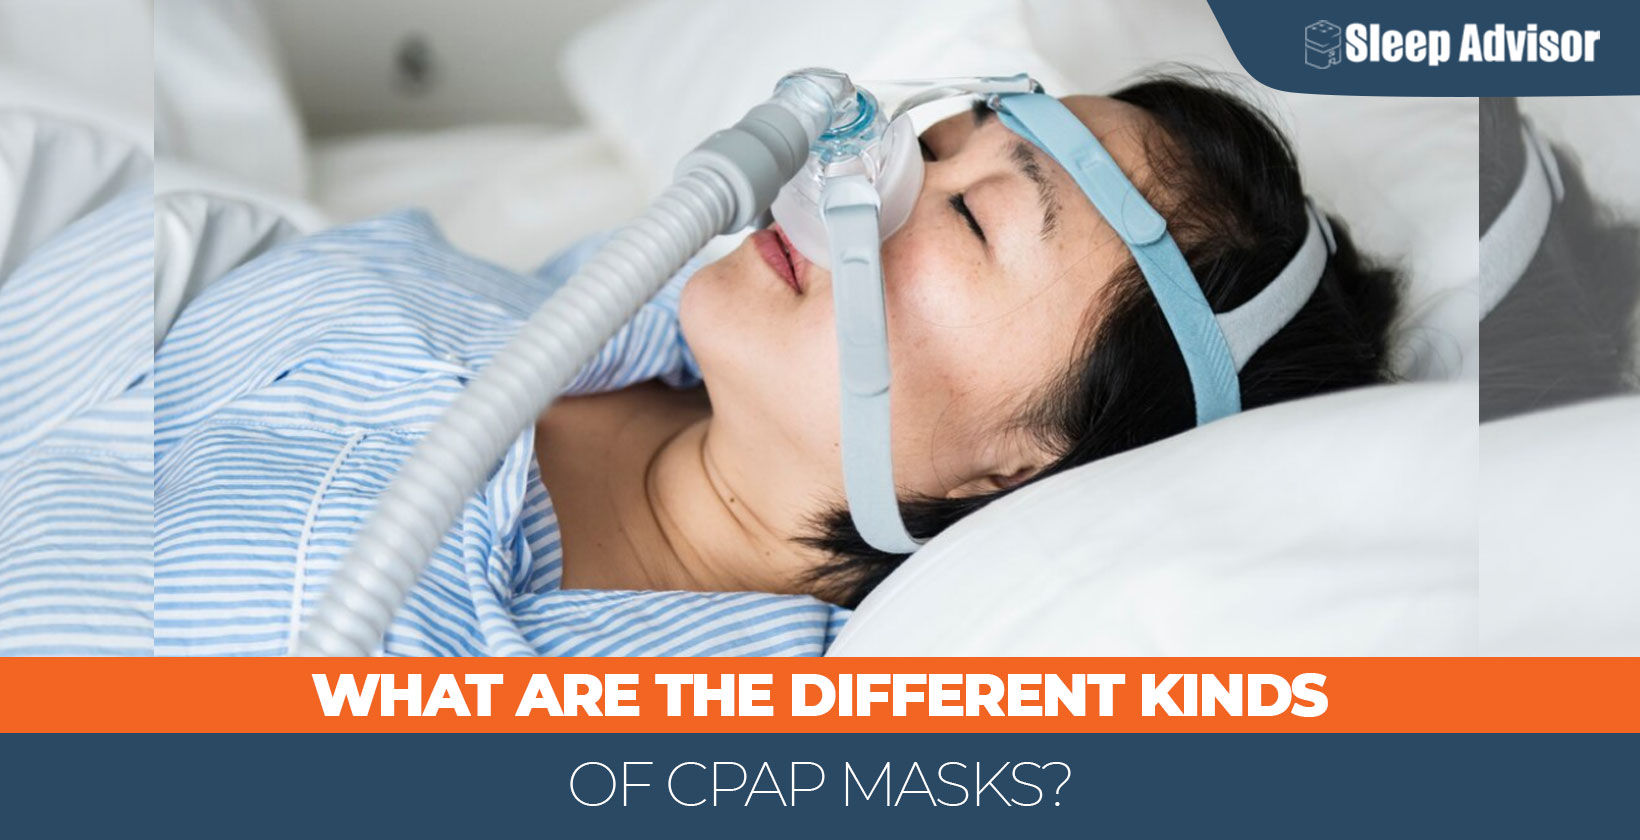 What Are the Different Kinds of CPAP Masks?